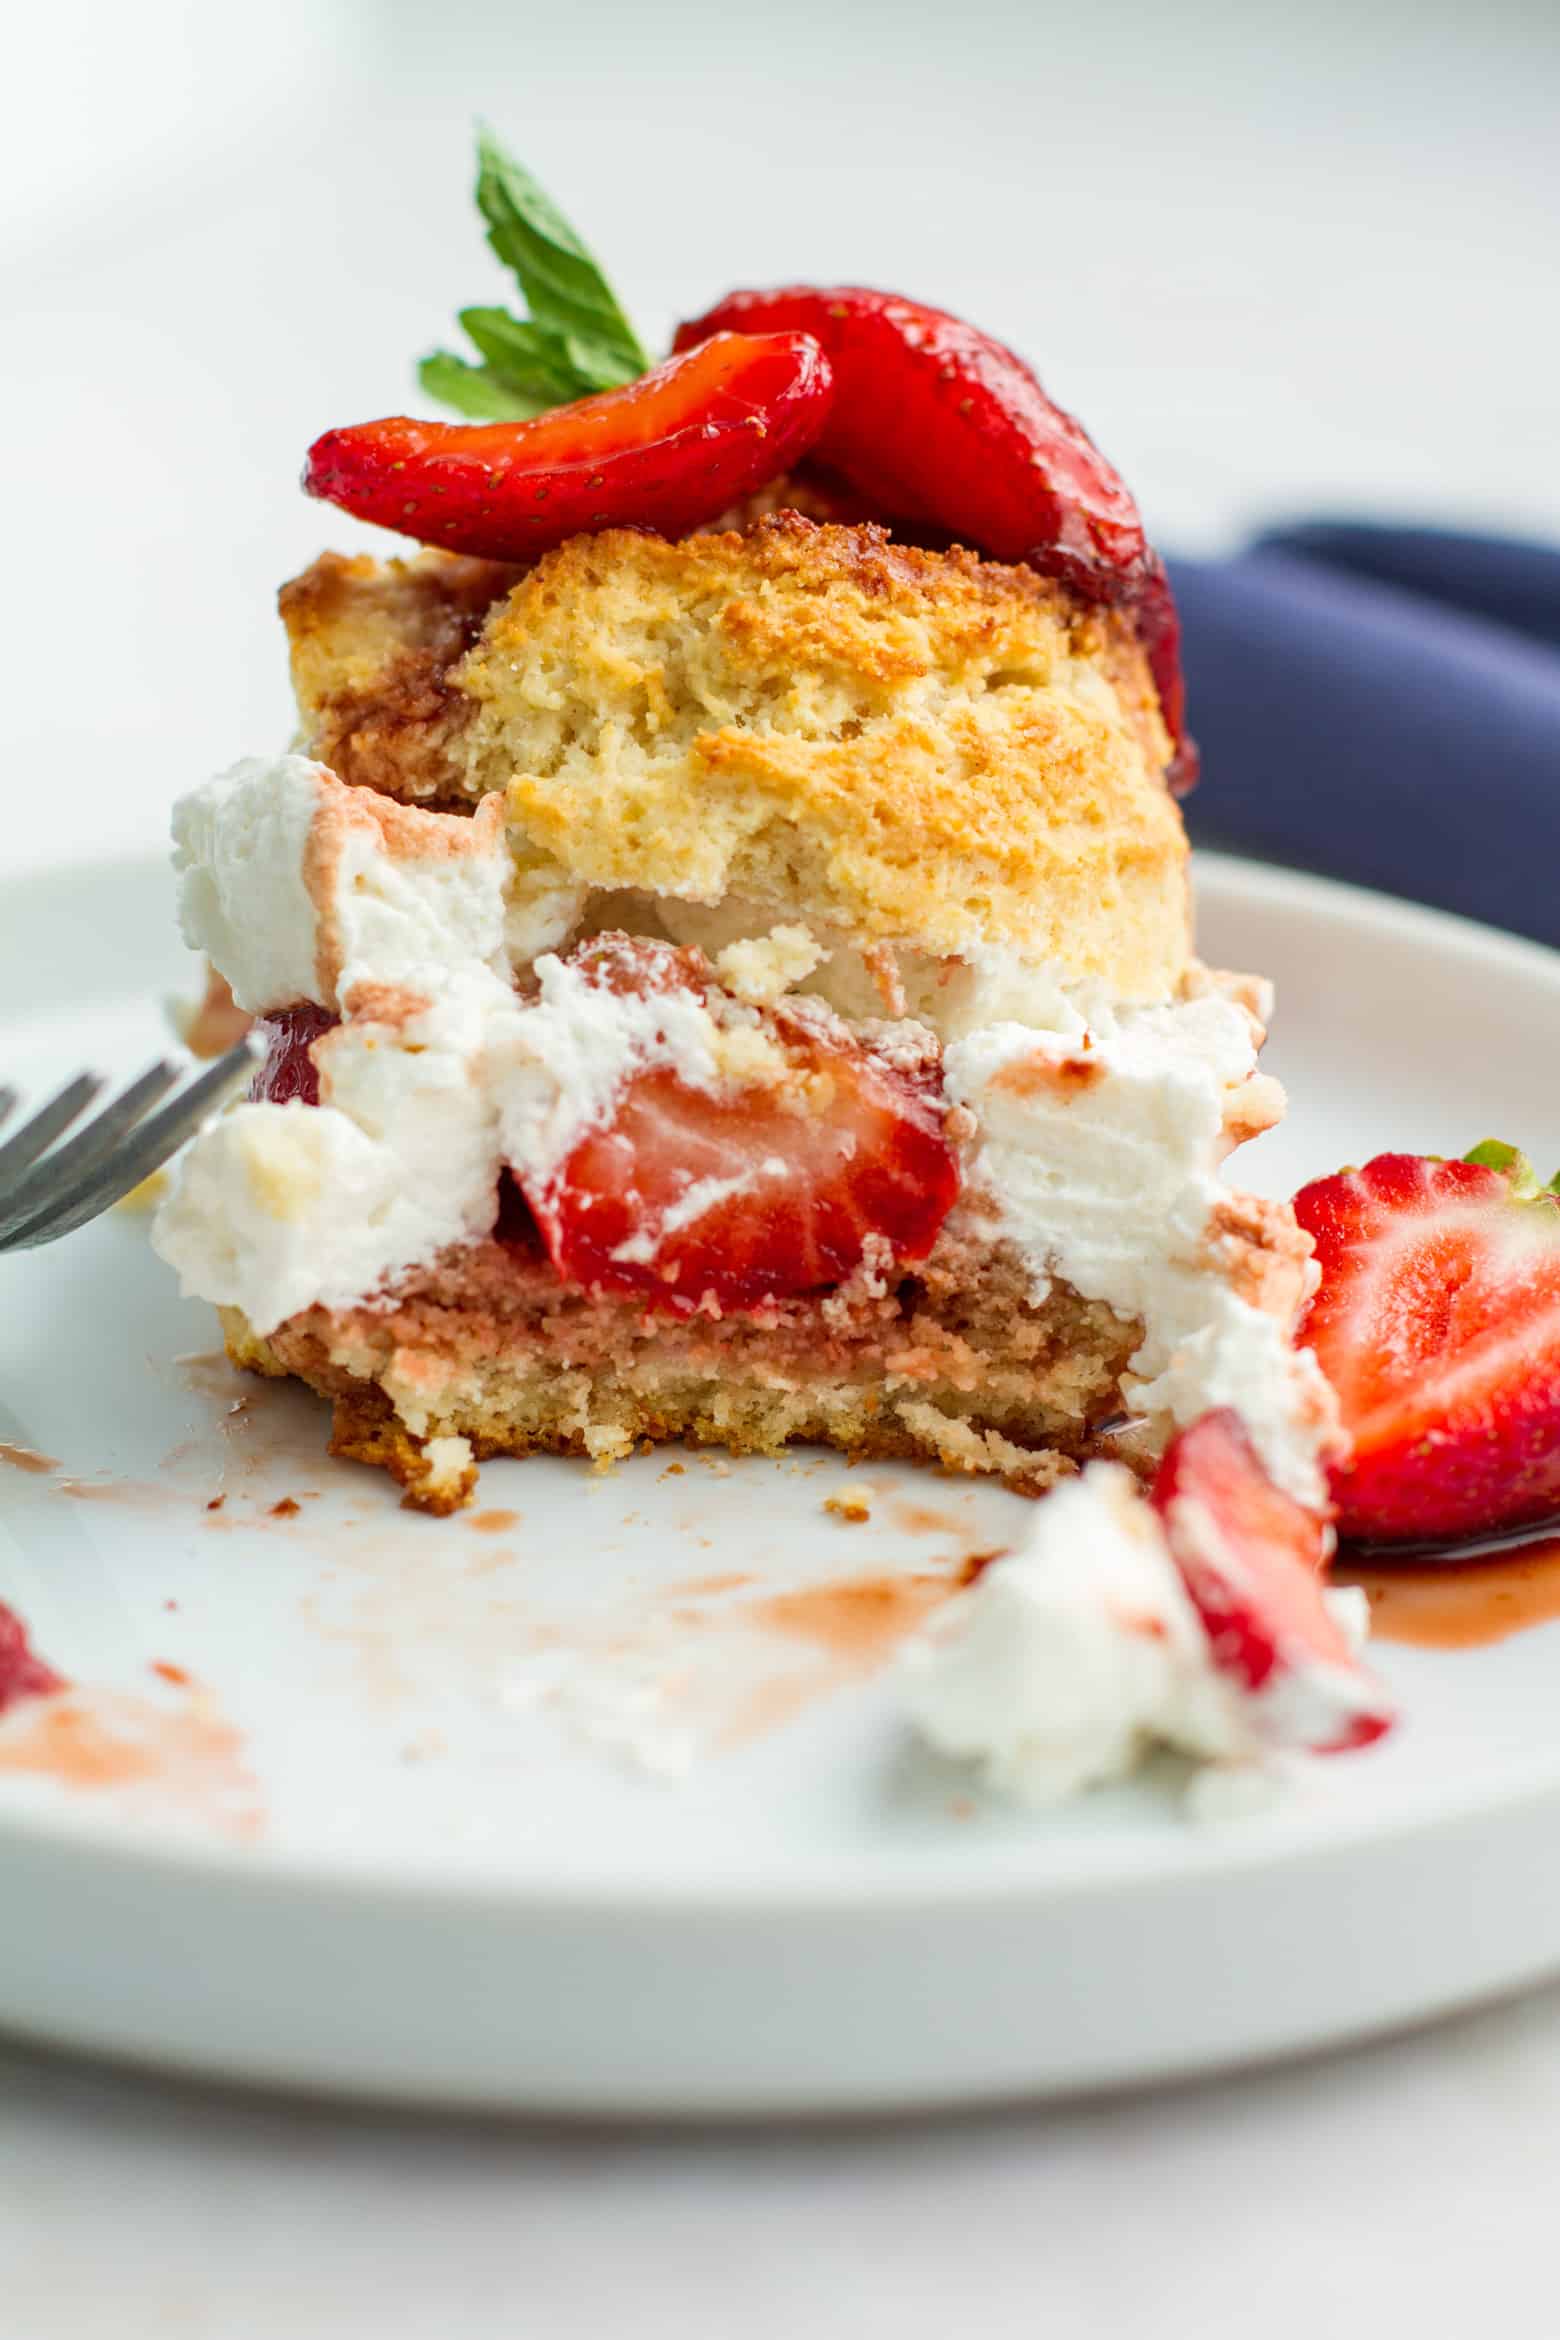 Strawberry Shortcake on a plate with a bite missing.